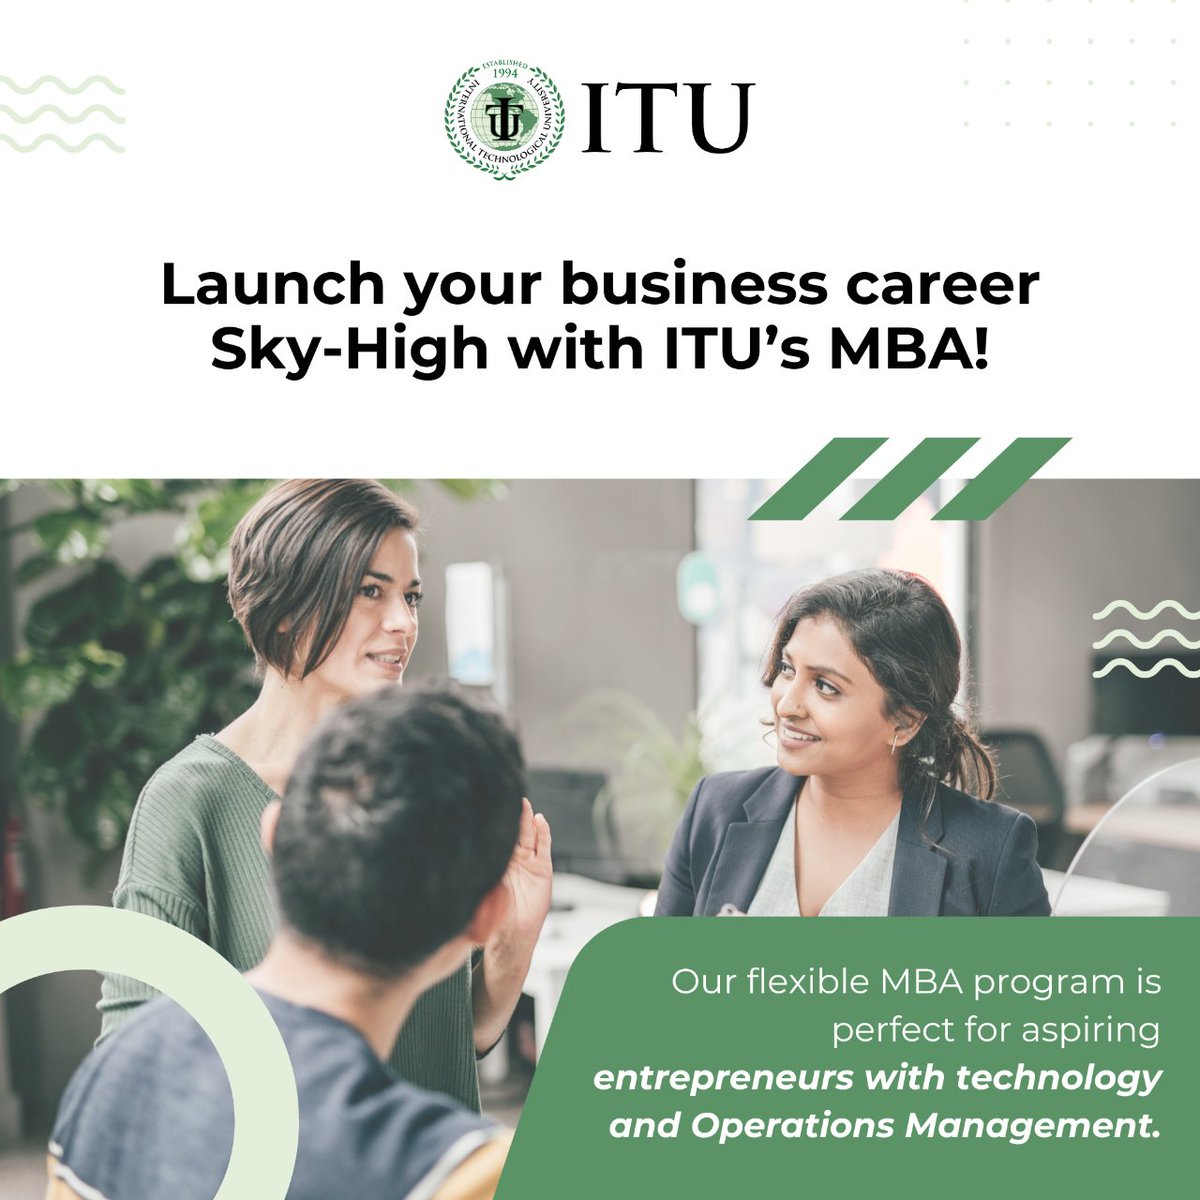 Launch your business career Sky-High with ITU’s MBA!
Learn more: discover.itu.edu

#itusv #mba #masterdegree #businessadministration #innovation #techeducation